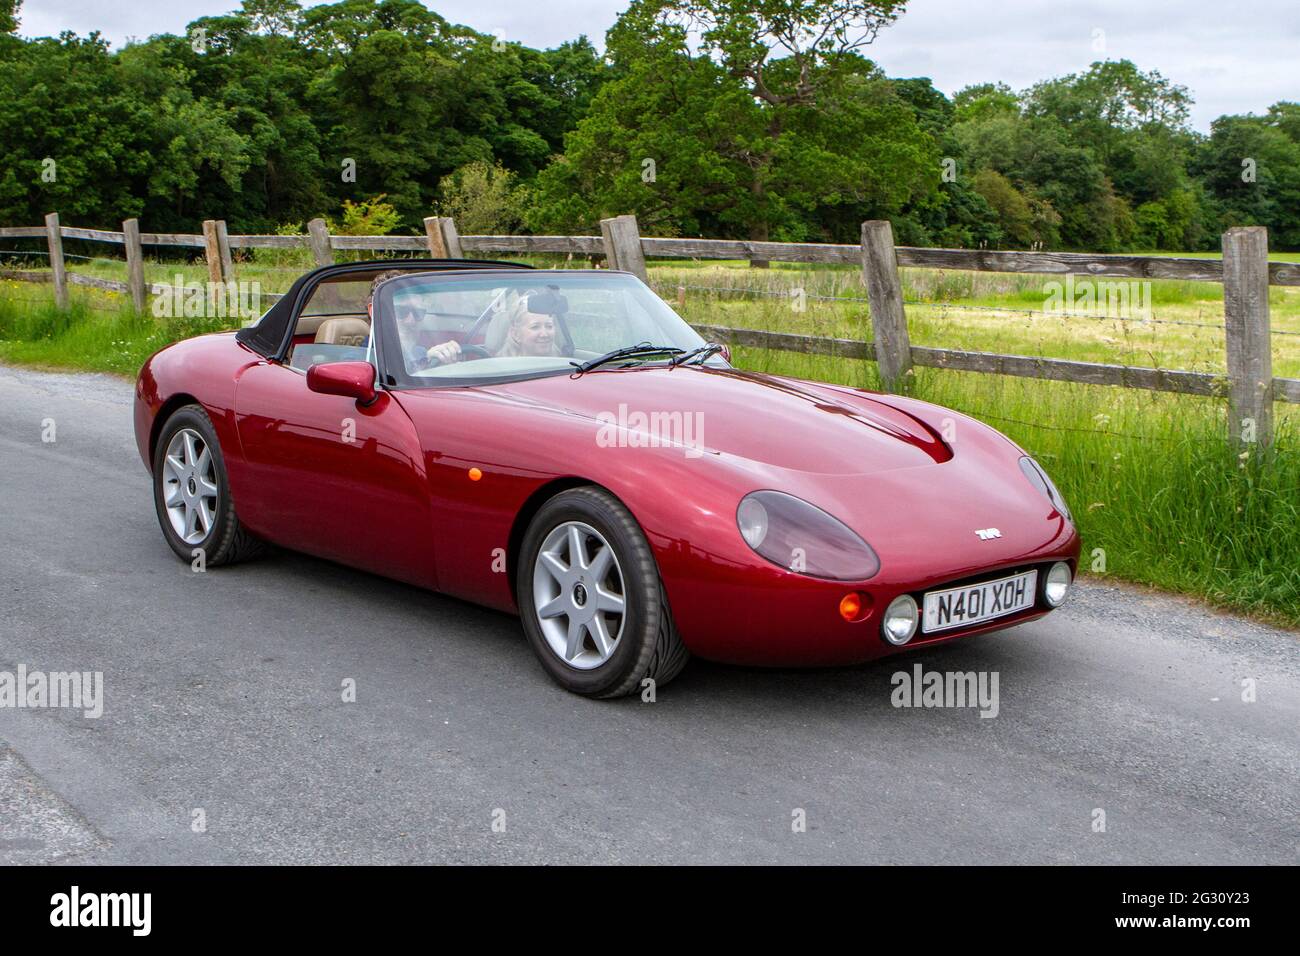 1996 90s red TVR Griffith sports car at the 58th Annual Manchester to Blackpool Vintage & Classic Car Run The heritage event is a ‘Touring Assembly’ Stock Photo